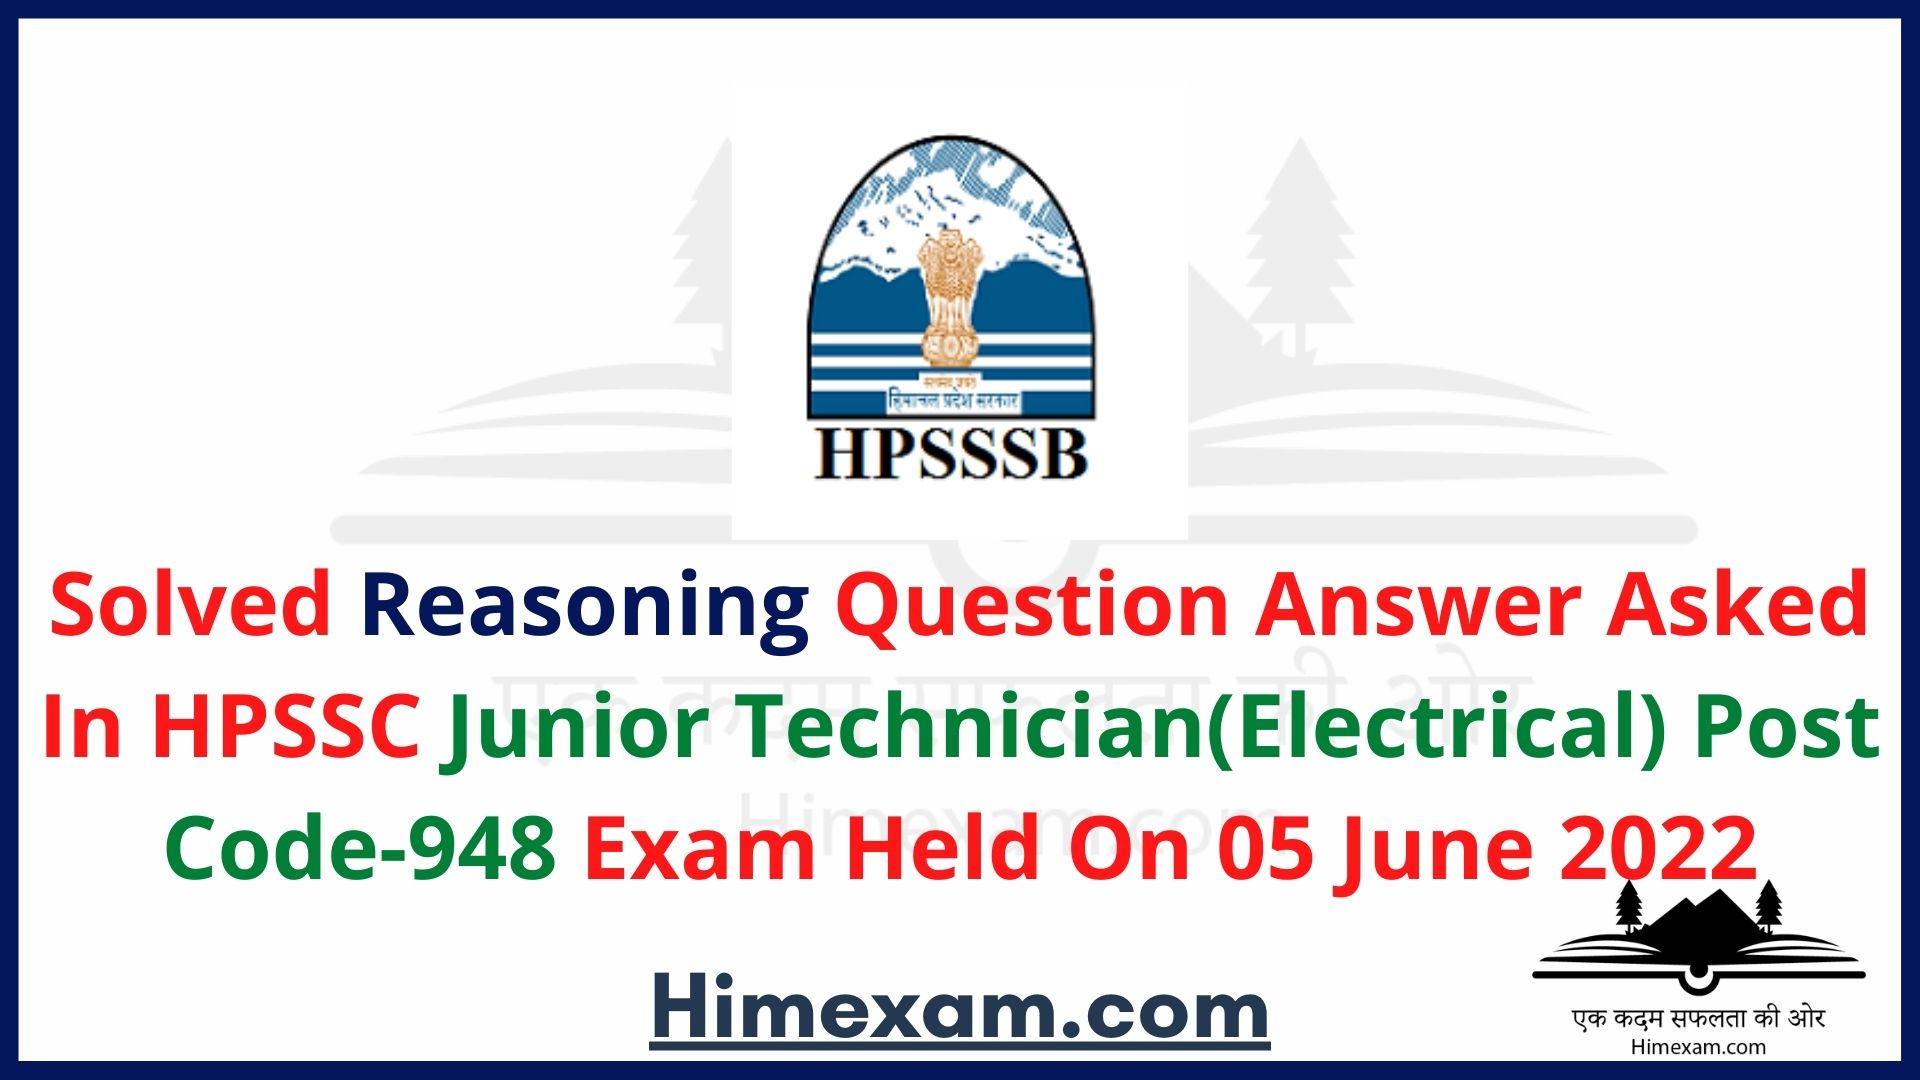 Solved Reasoning Question Asked In Junior Technician(Electrical) Post Code-948 Exam  2022